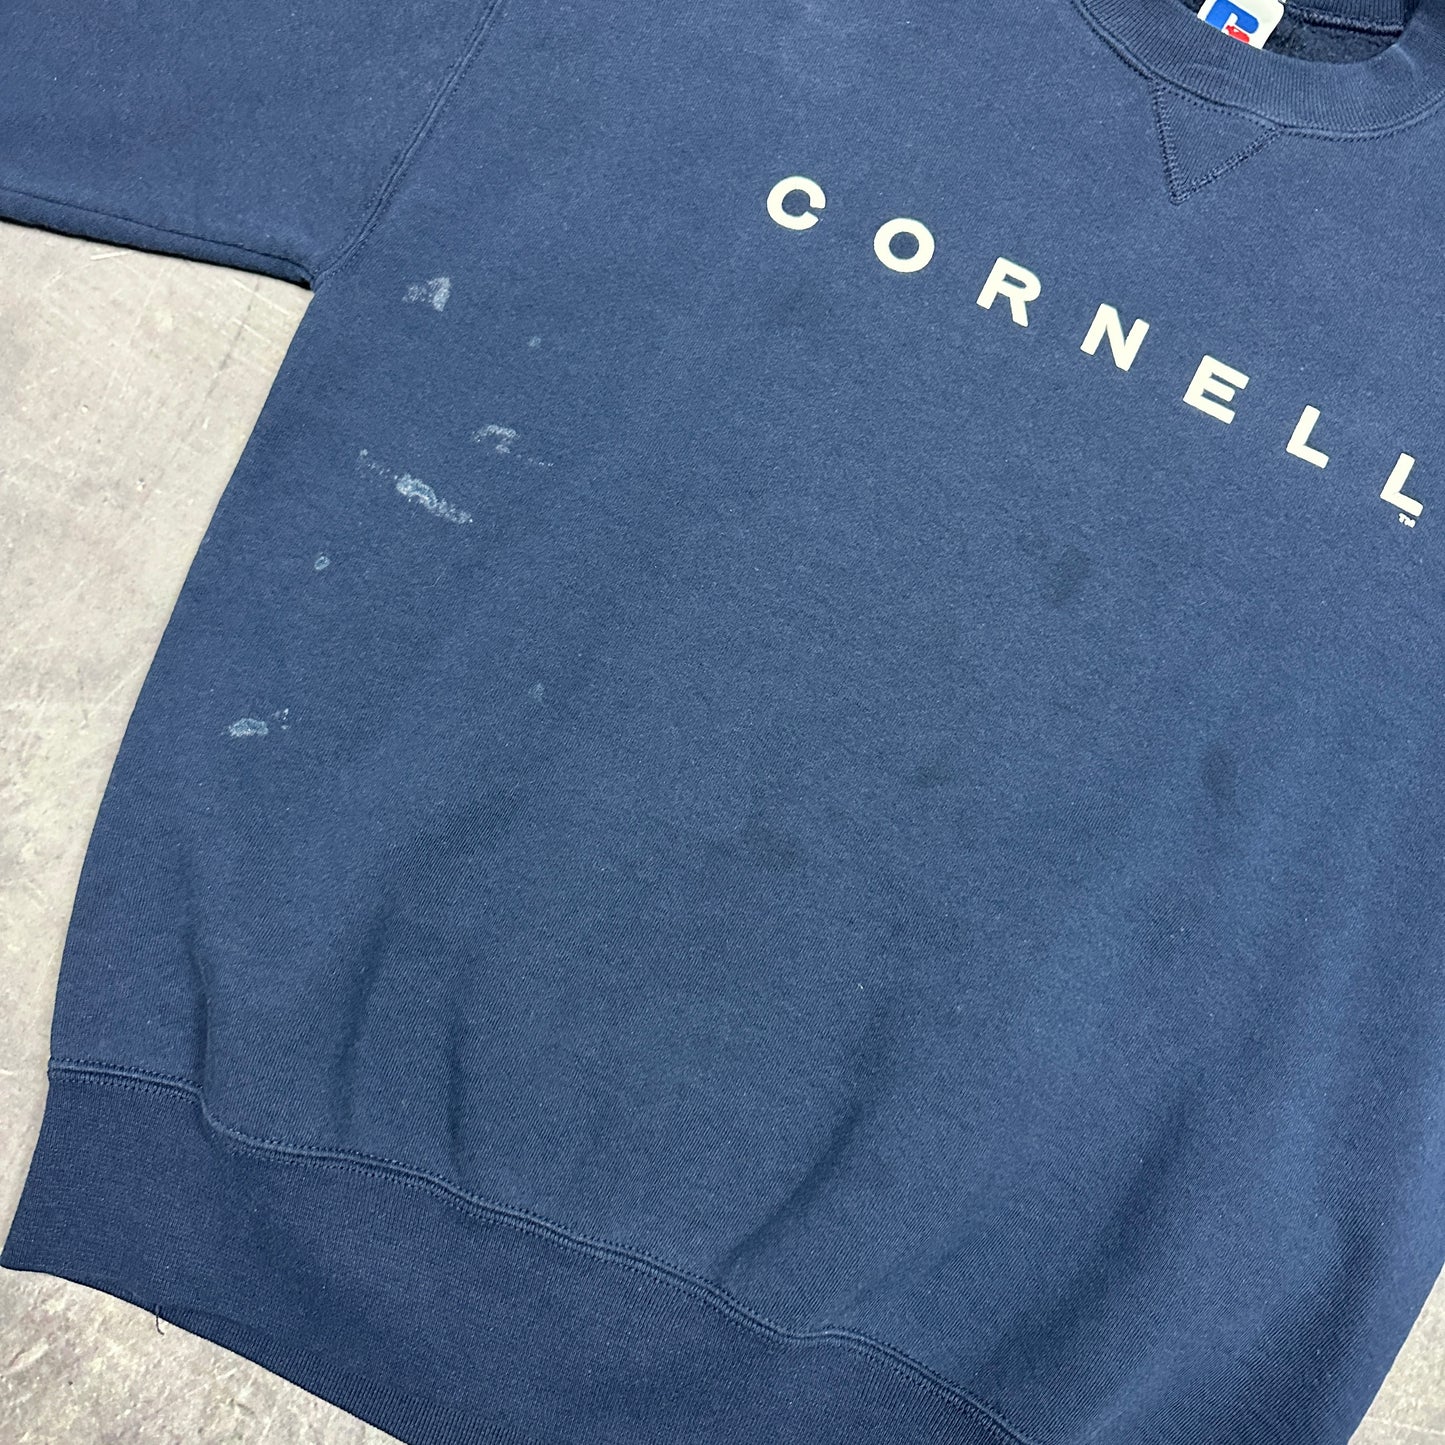 90s Navy Blue Cornell University Russell Athletic Spellout Crewneck Sweasthirt L AE33